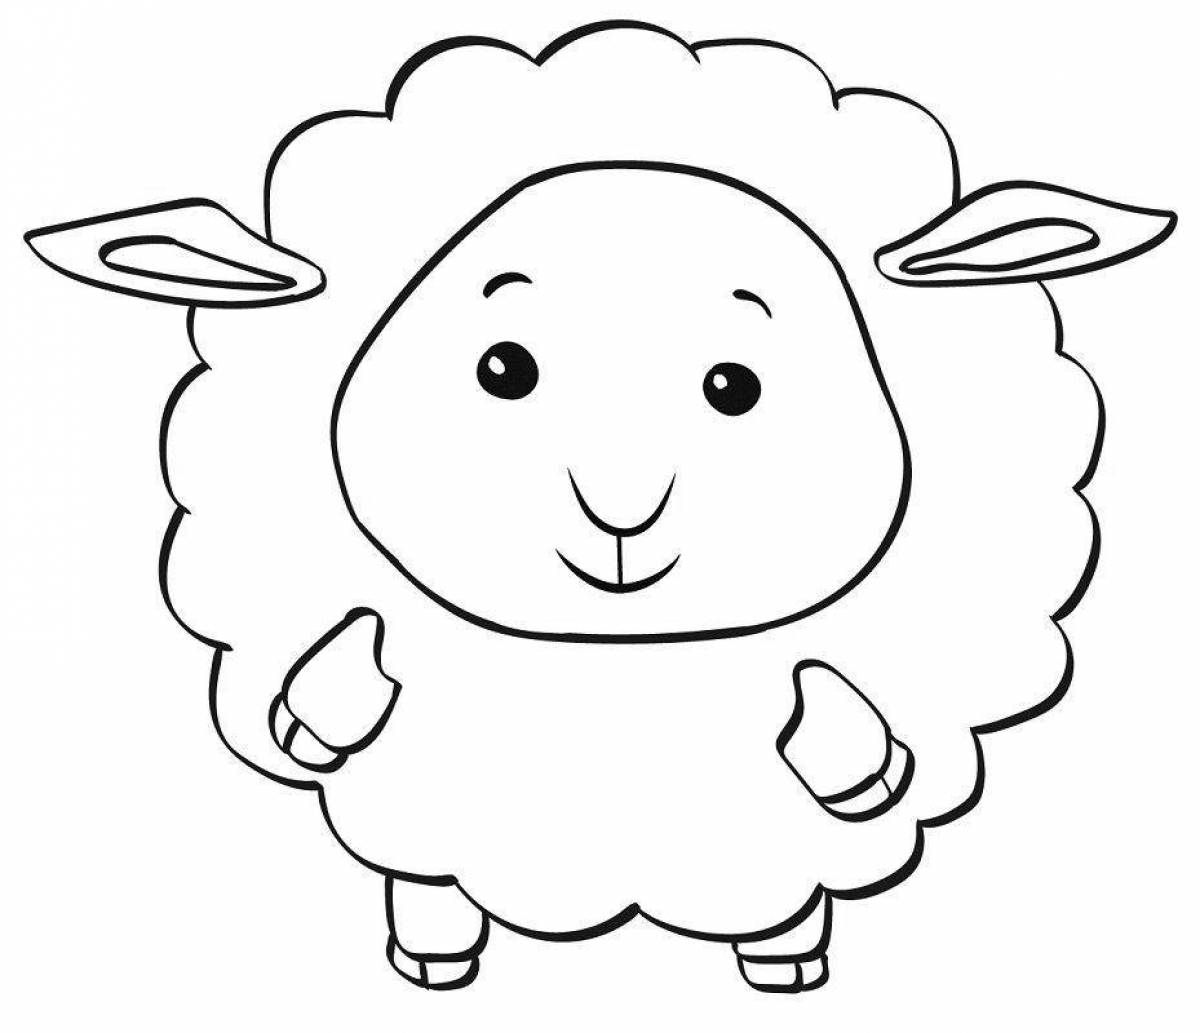 Bright coloring sheep for children